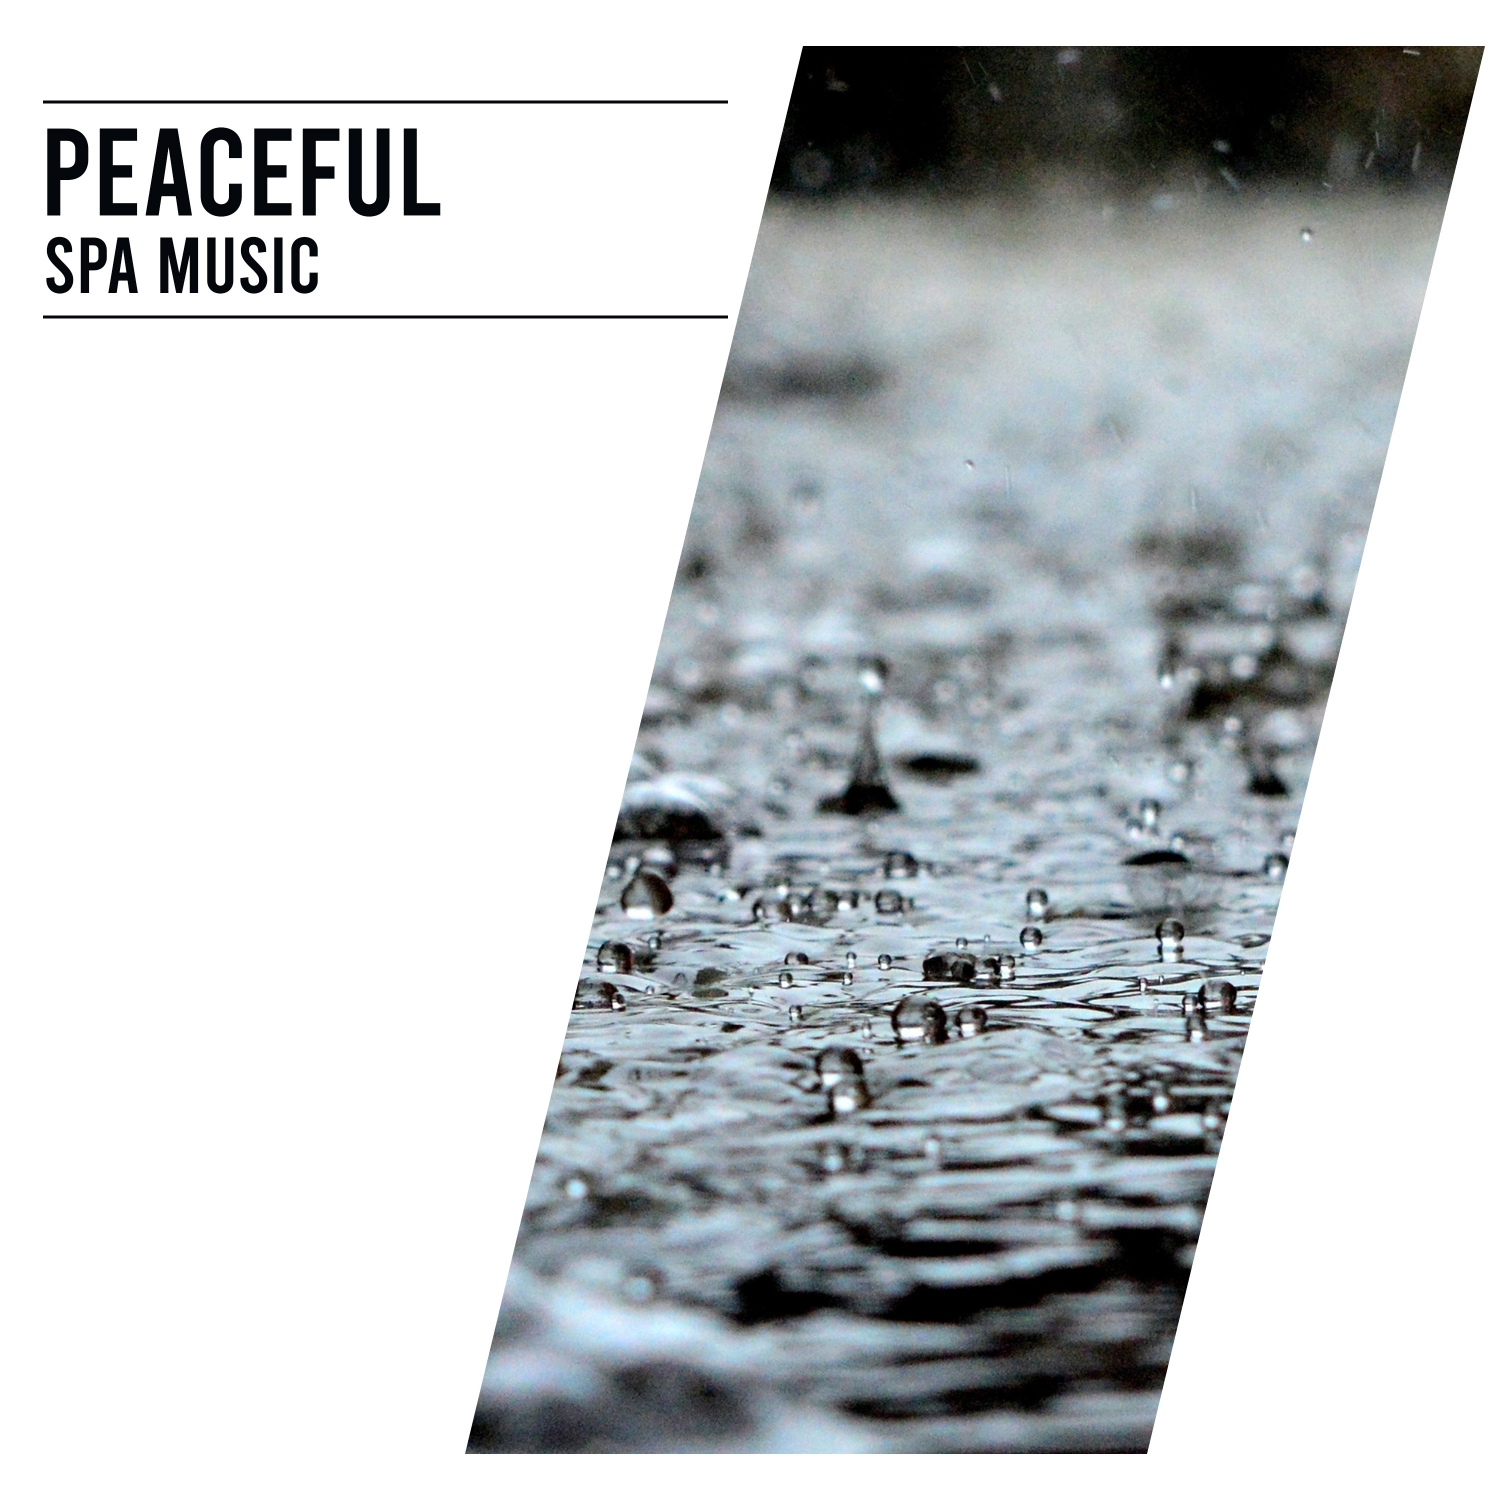 12 Sounds of Rain and Thunder Storms, Peaceful Spa Music